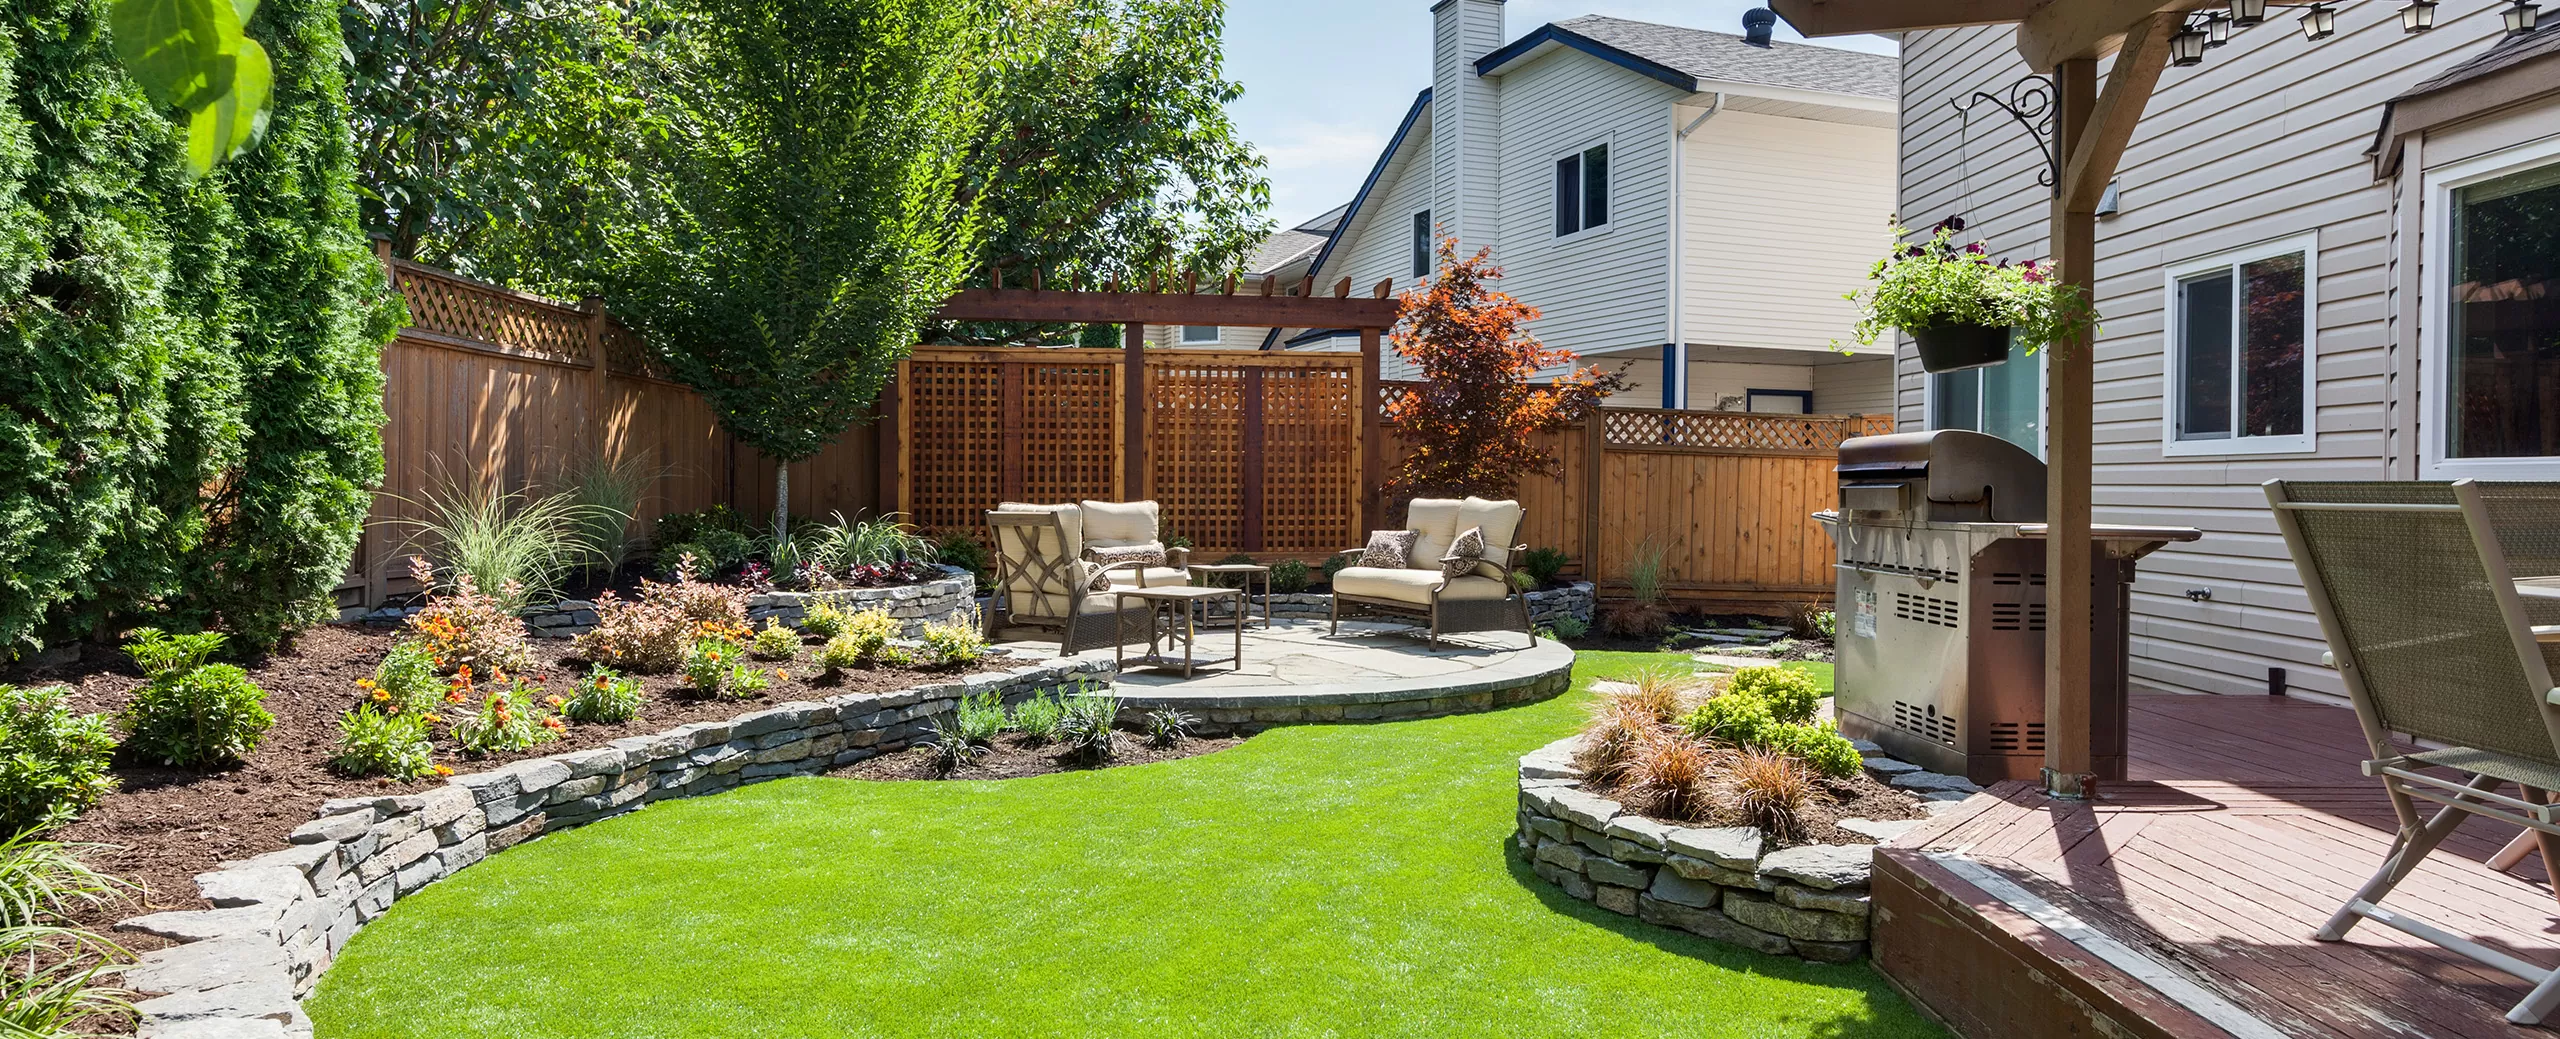 A comprehensive range of landscape design services to cater to all your needs?